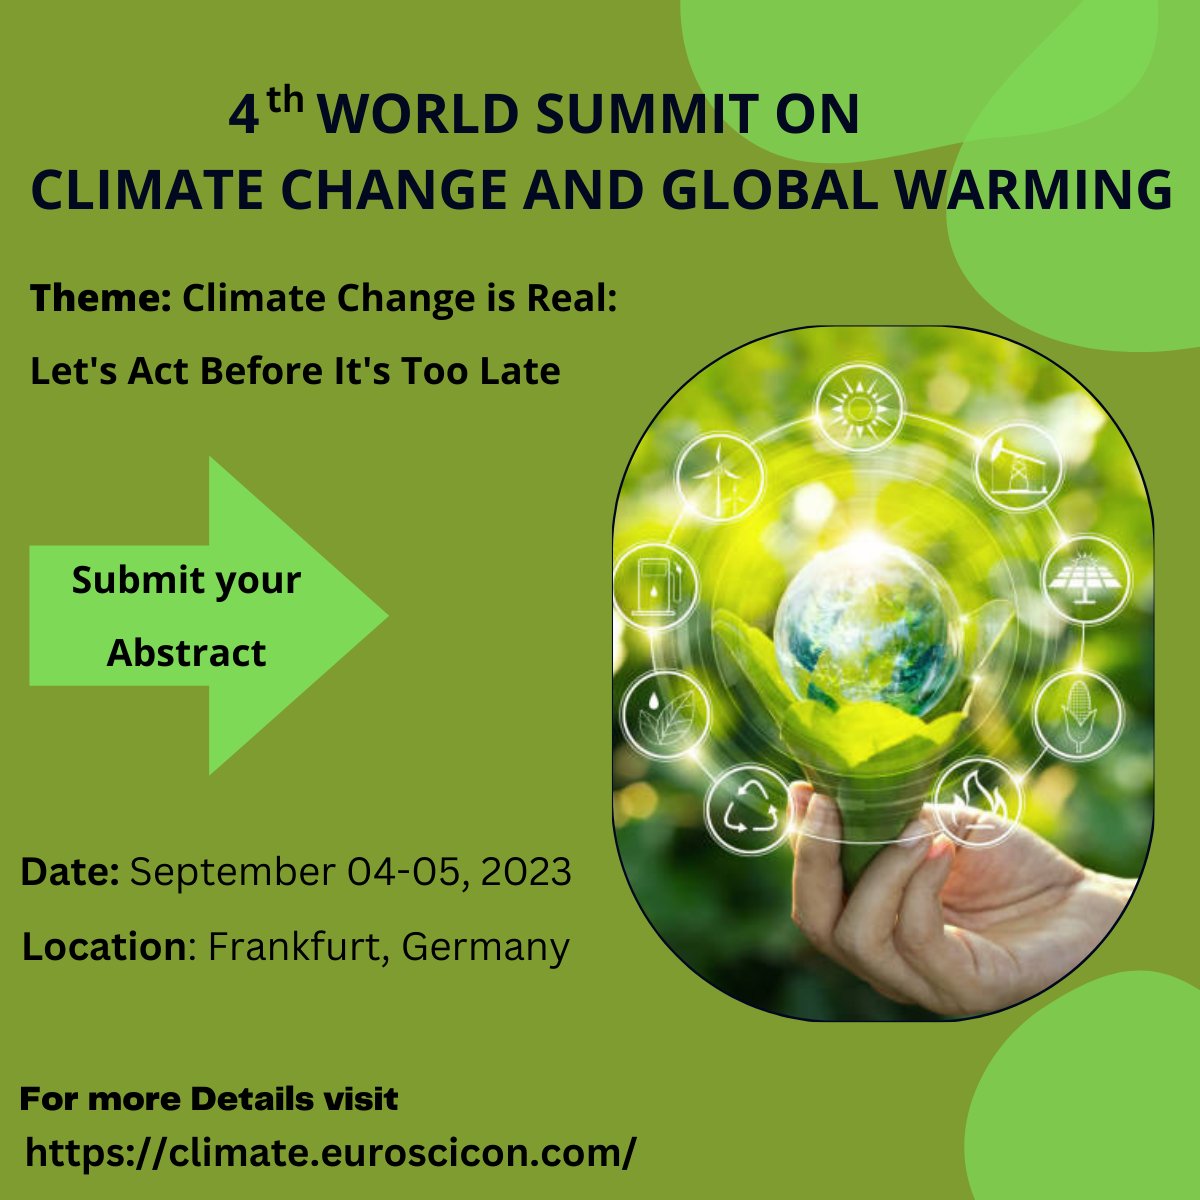 'It's not too late to make a difference. #ClimateAction' #climatechange #Global_warming #Agriculture #EarthScience #EnvironmentalScience #Meteorology #Limnology #PollutionControl for more details Visit: bit.ly/2M97Xnq